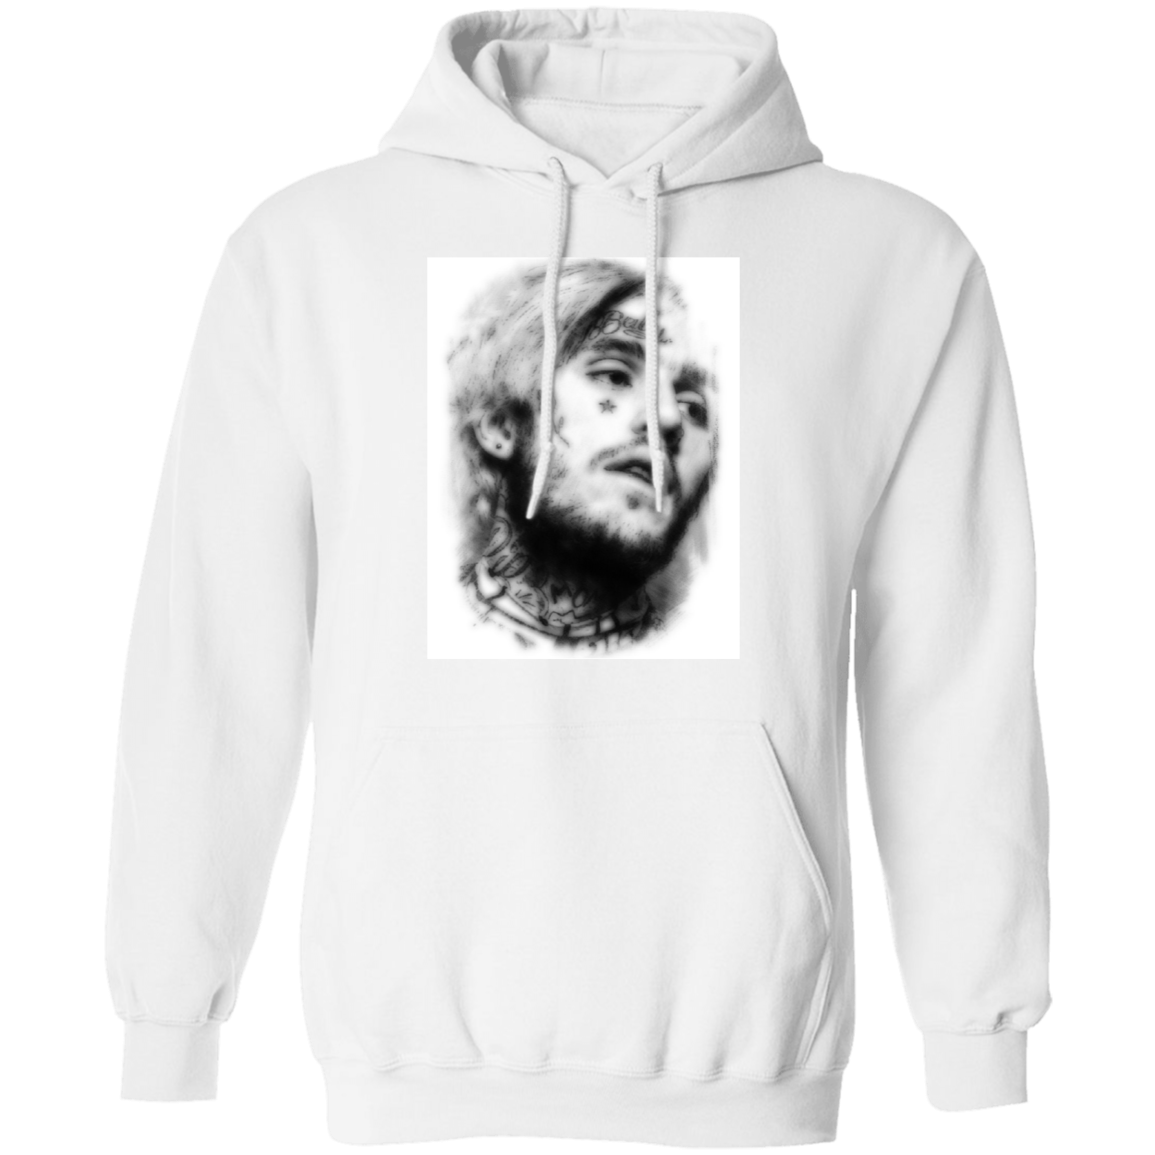 white hoodie with lil peep on the front